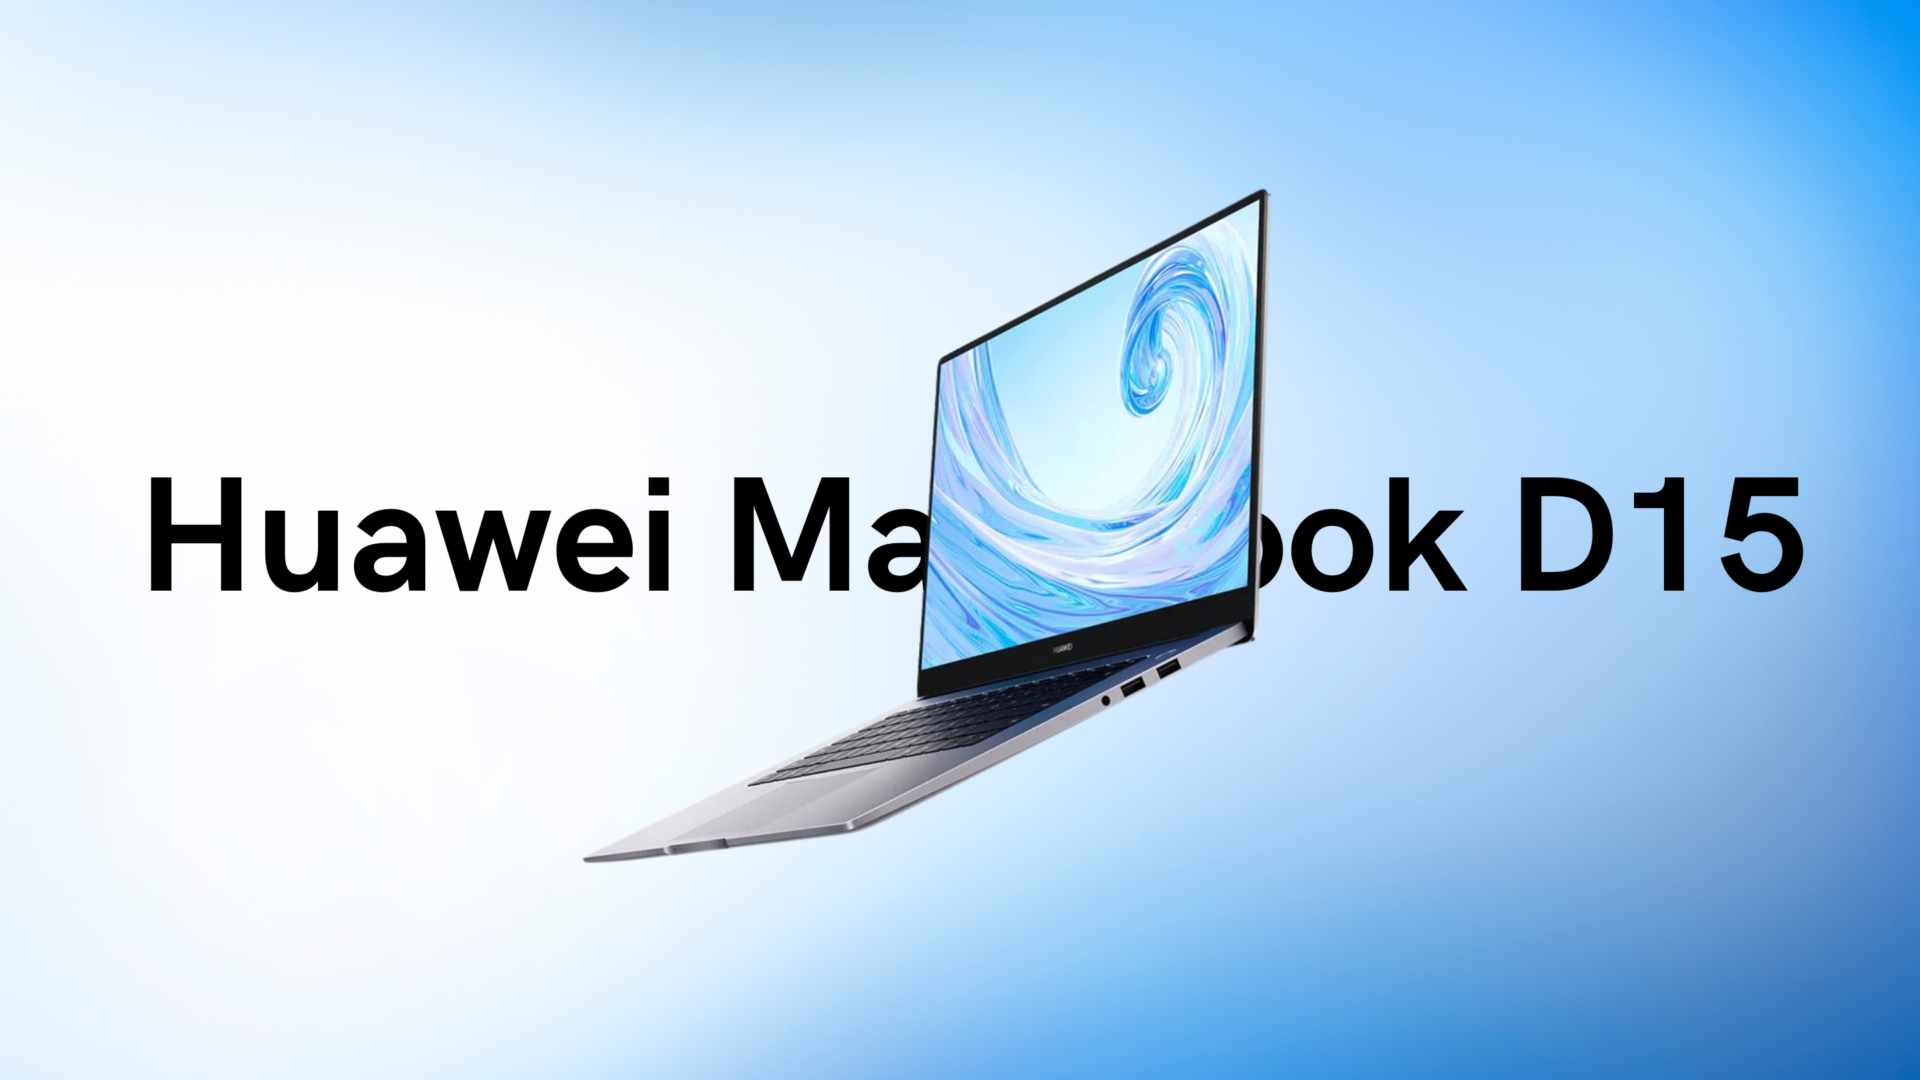 Huawei MateBook D 15 arrives in the UK with Intel Core i5 SoC at £750